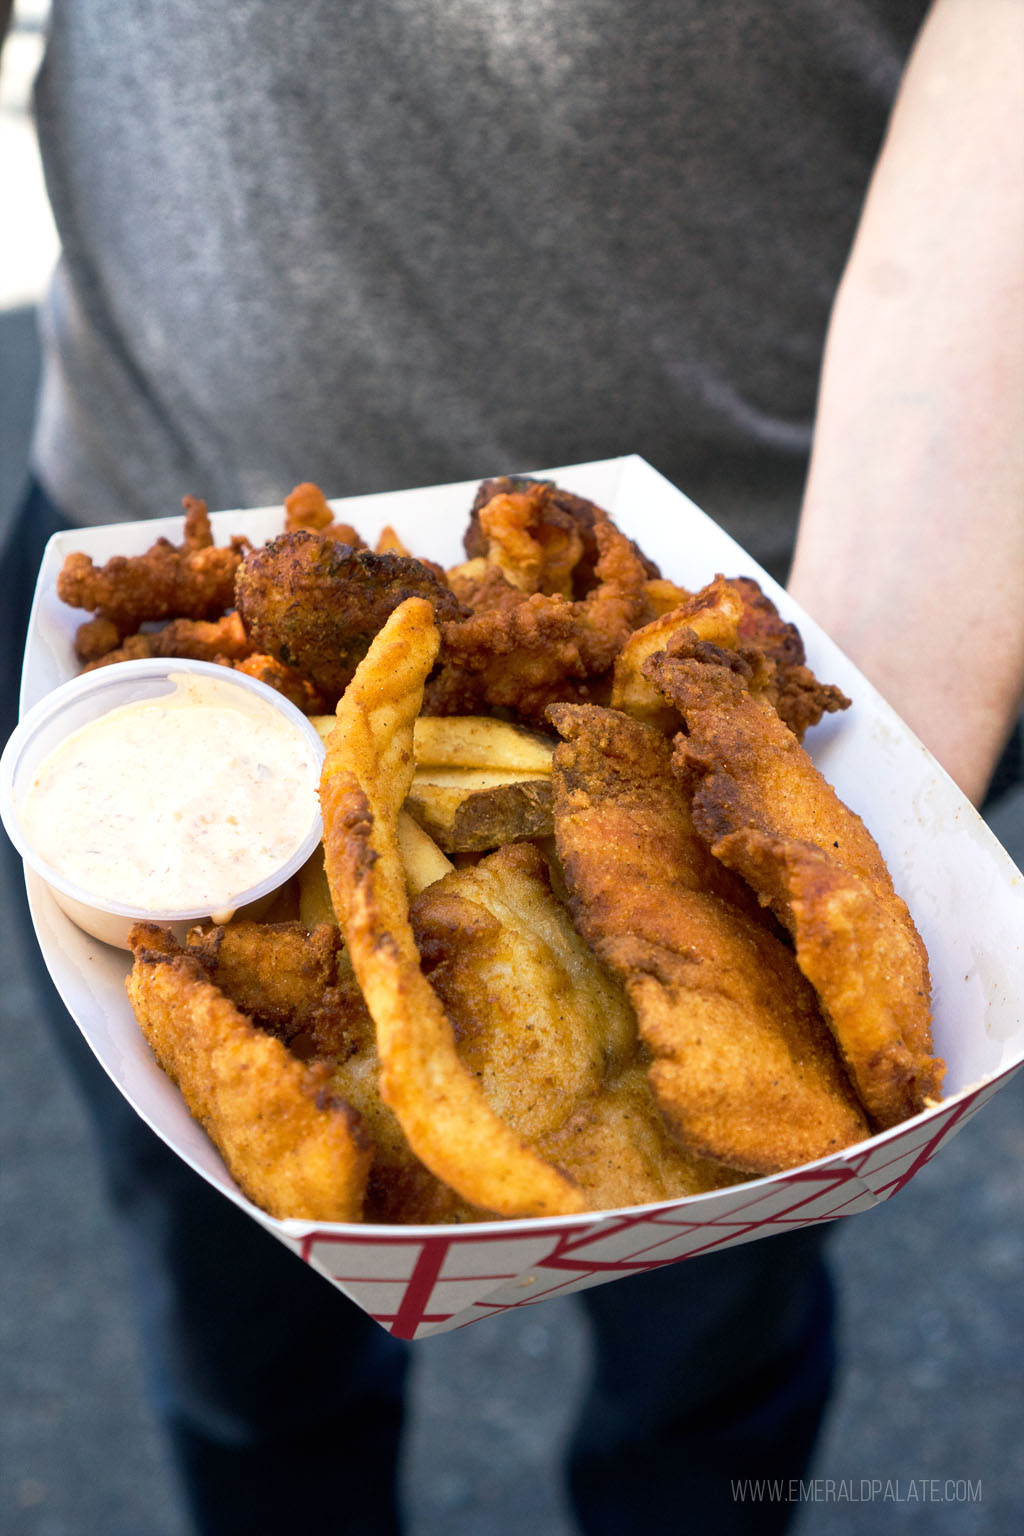 Where to Get Fabulous Fish and Chips in the Seattle Area